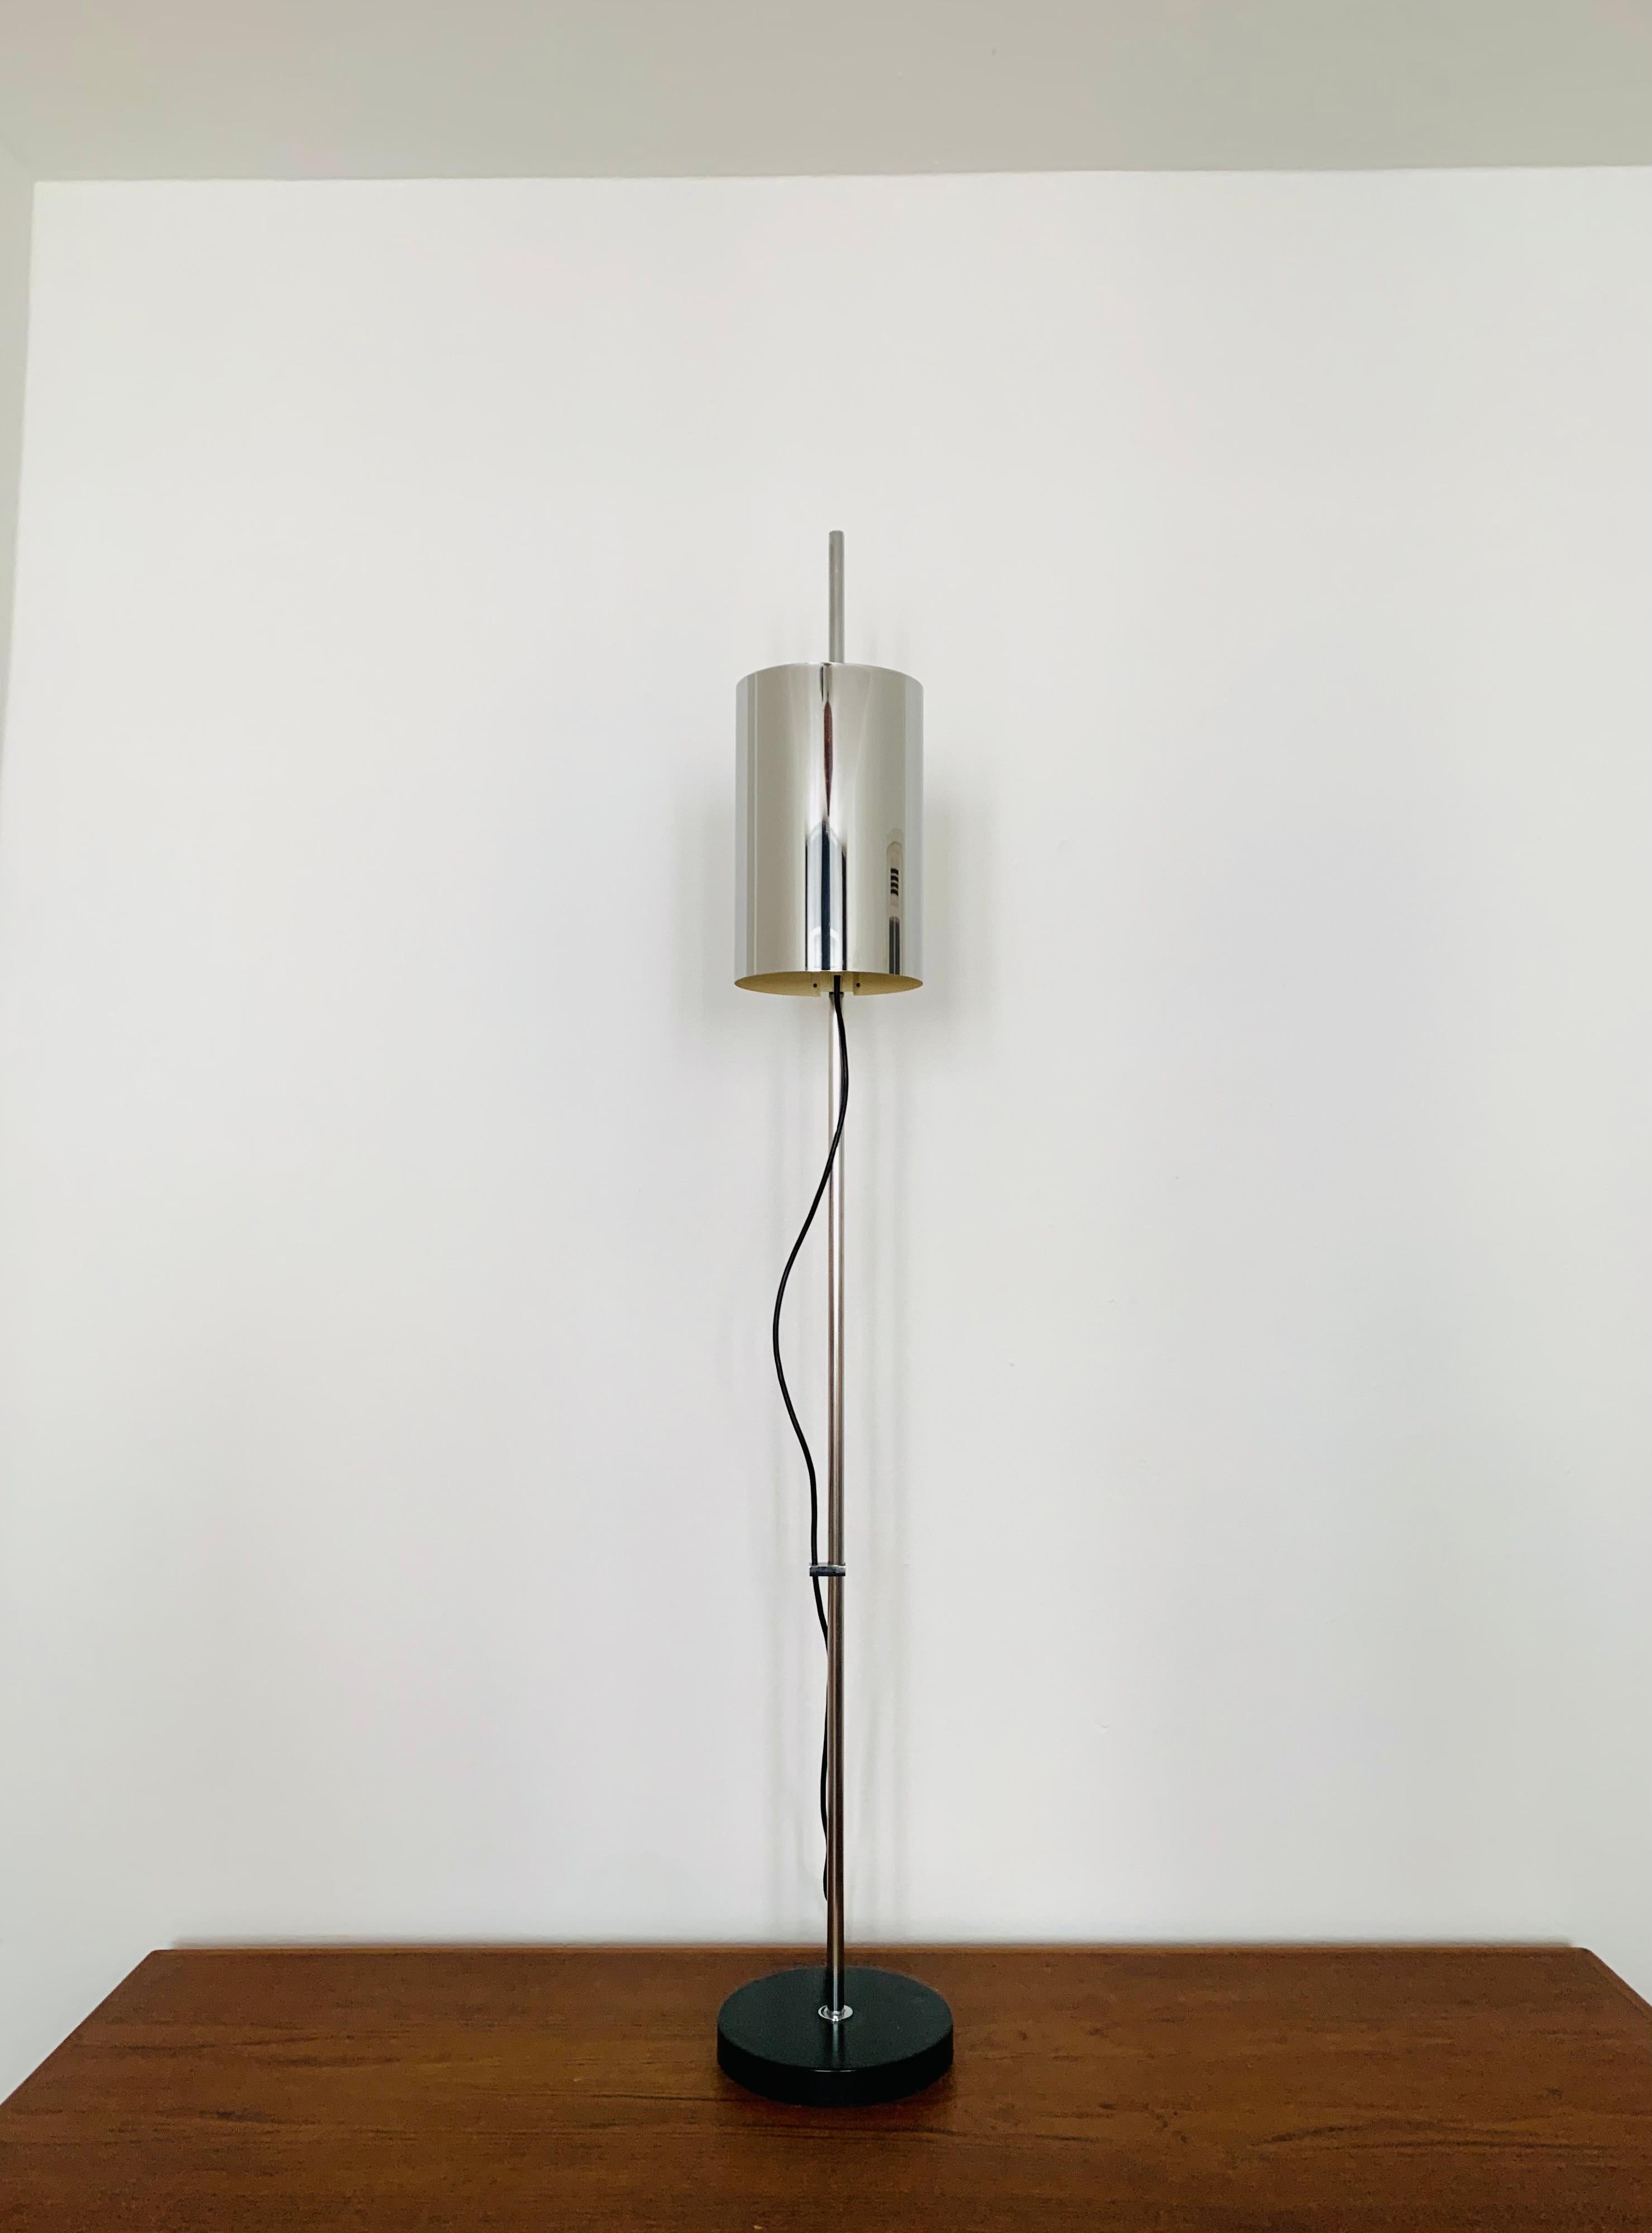 Stunning floor lamp from the 1960s.
Very unusual design and very high quality workmanship.
The lampshade is infinitely adjustable.
The design creates a spectacular play of light.

Manufacturer: Raak Amsterdam

Condition:

Very good vintage